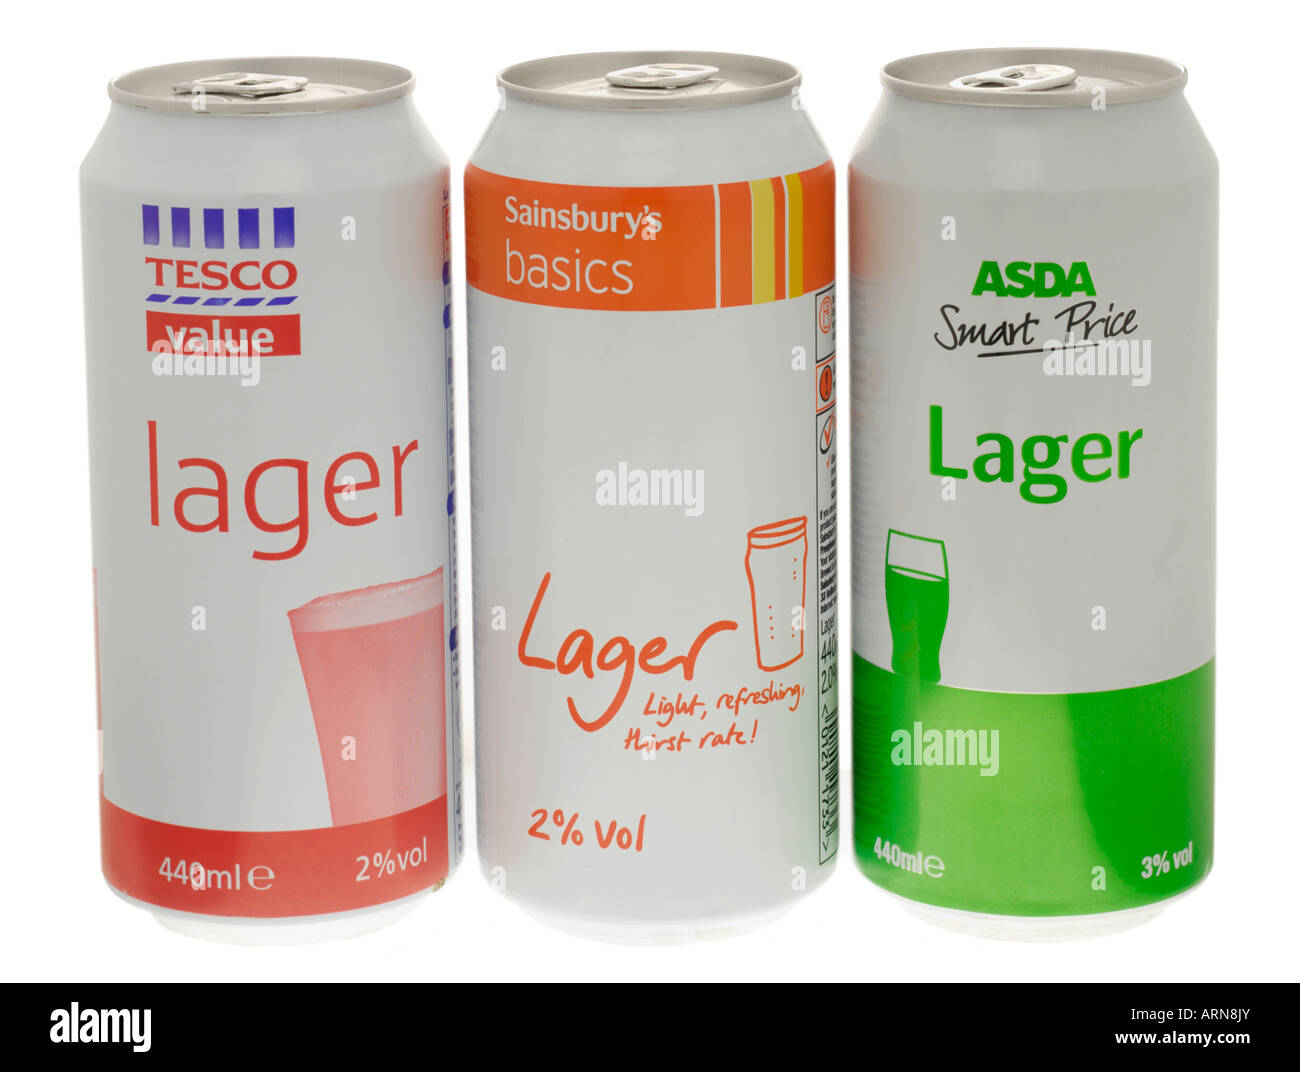 cans-of-cheap-supermarket-lager-arn8jy.jpg